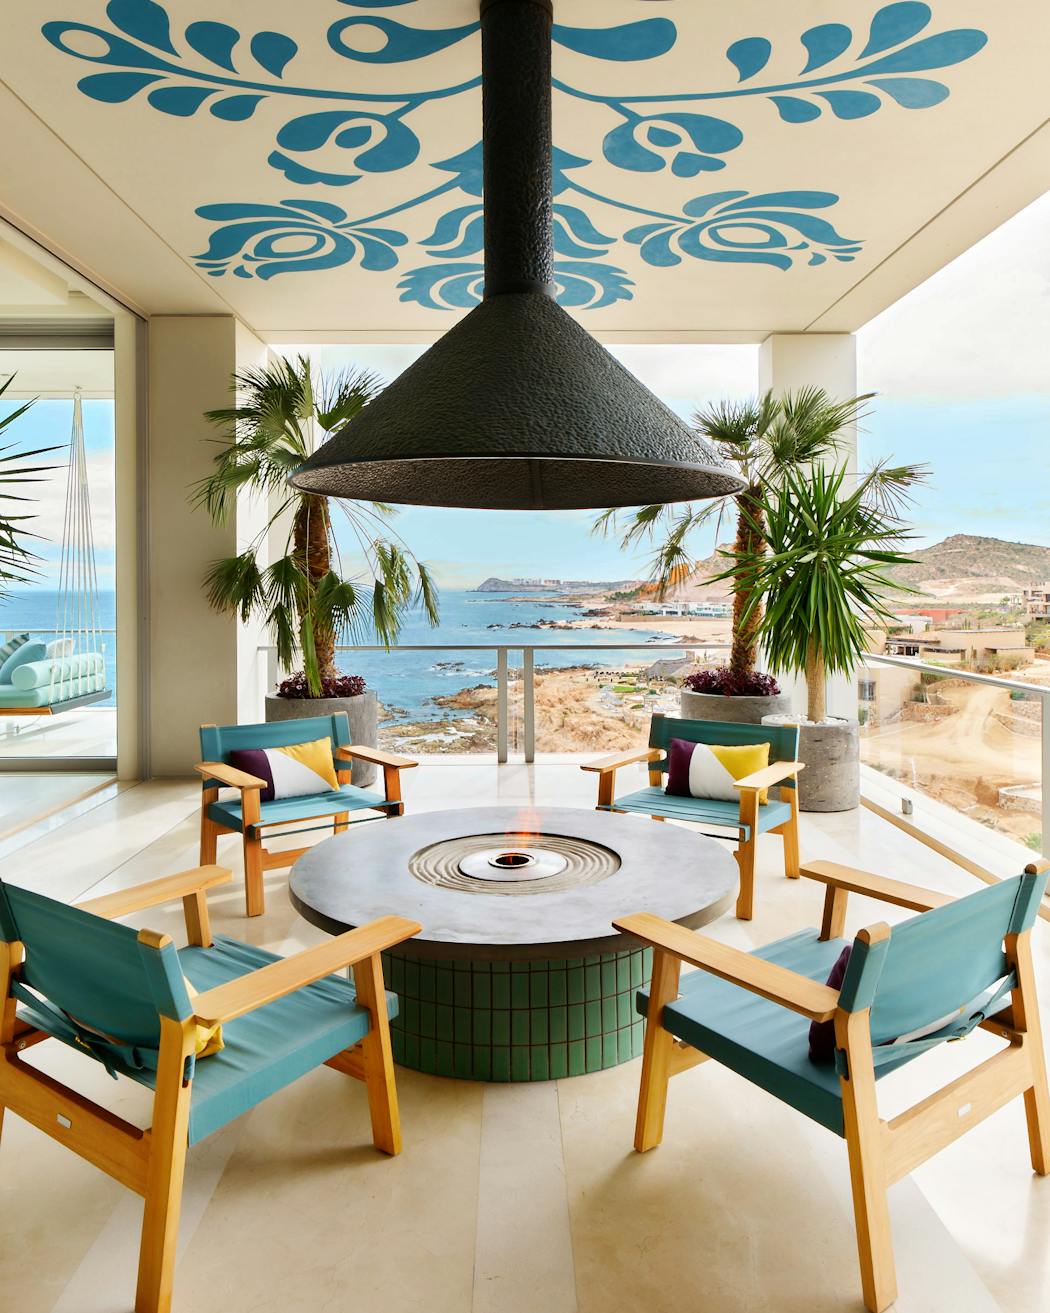 An outdoor living area designed by Martyn Lawrence Bullard in Los Cabos, Mexico. 